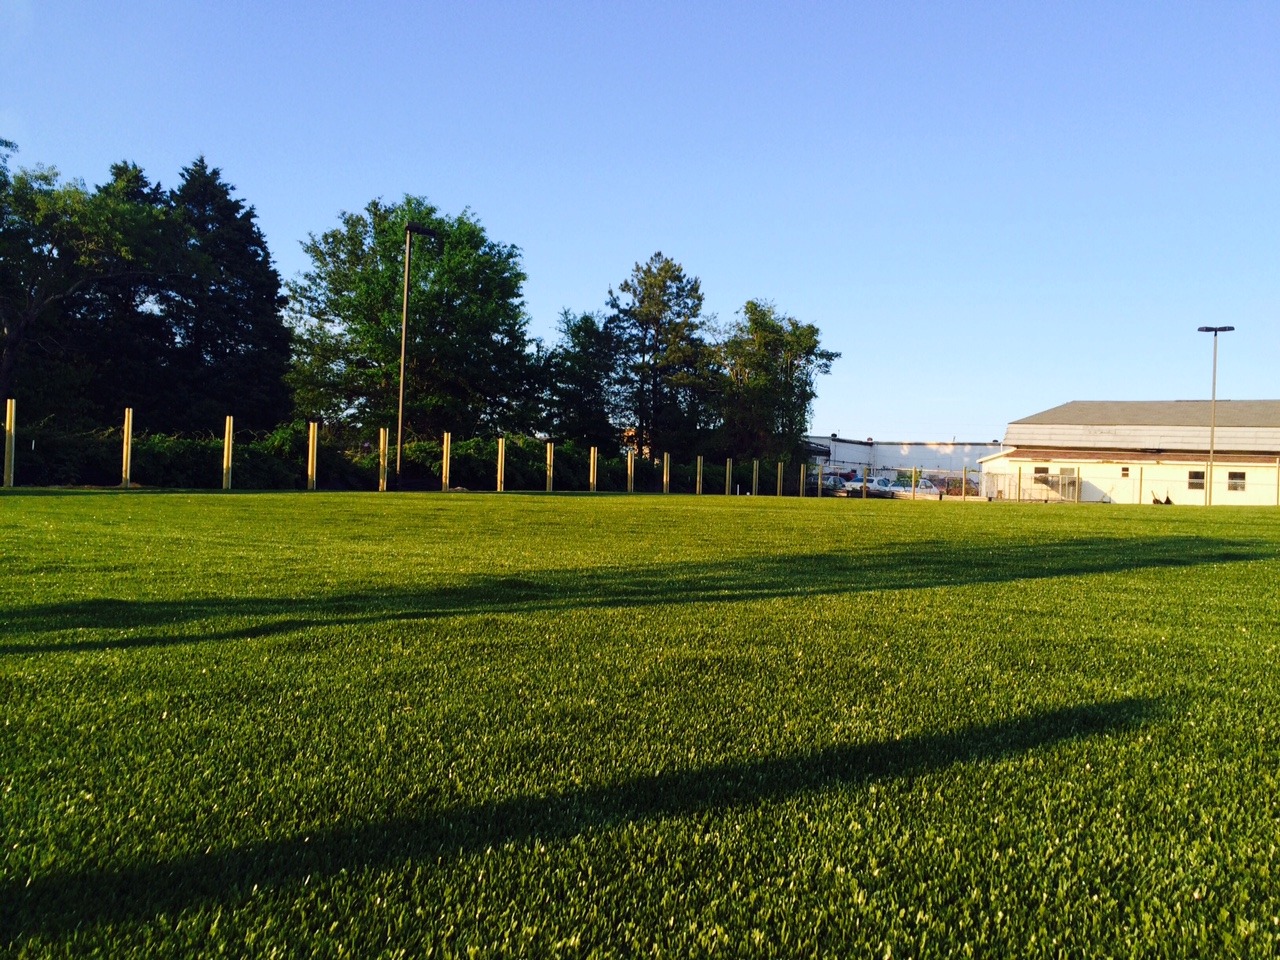 A well-manicured green field with a row of wood posts, trees, and buildings in the background under a clear blue sky during golden hour.